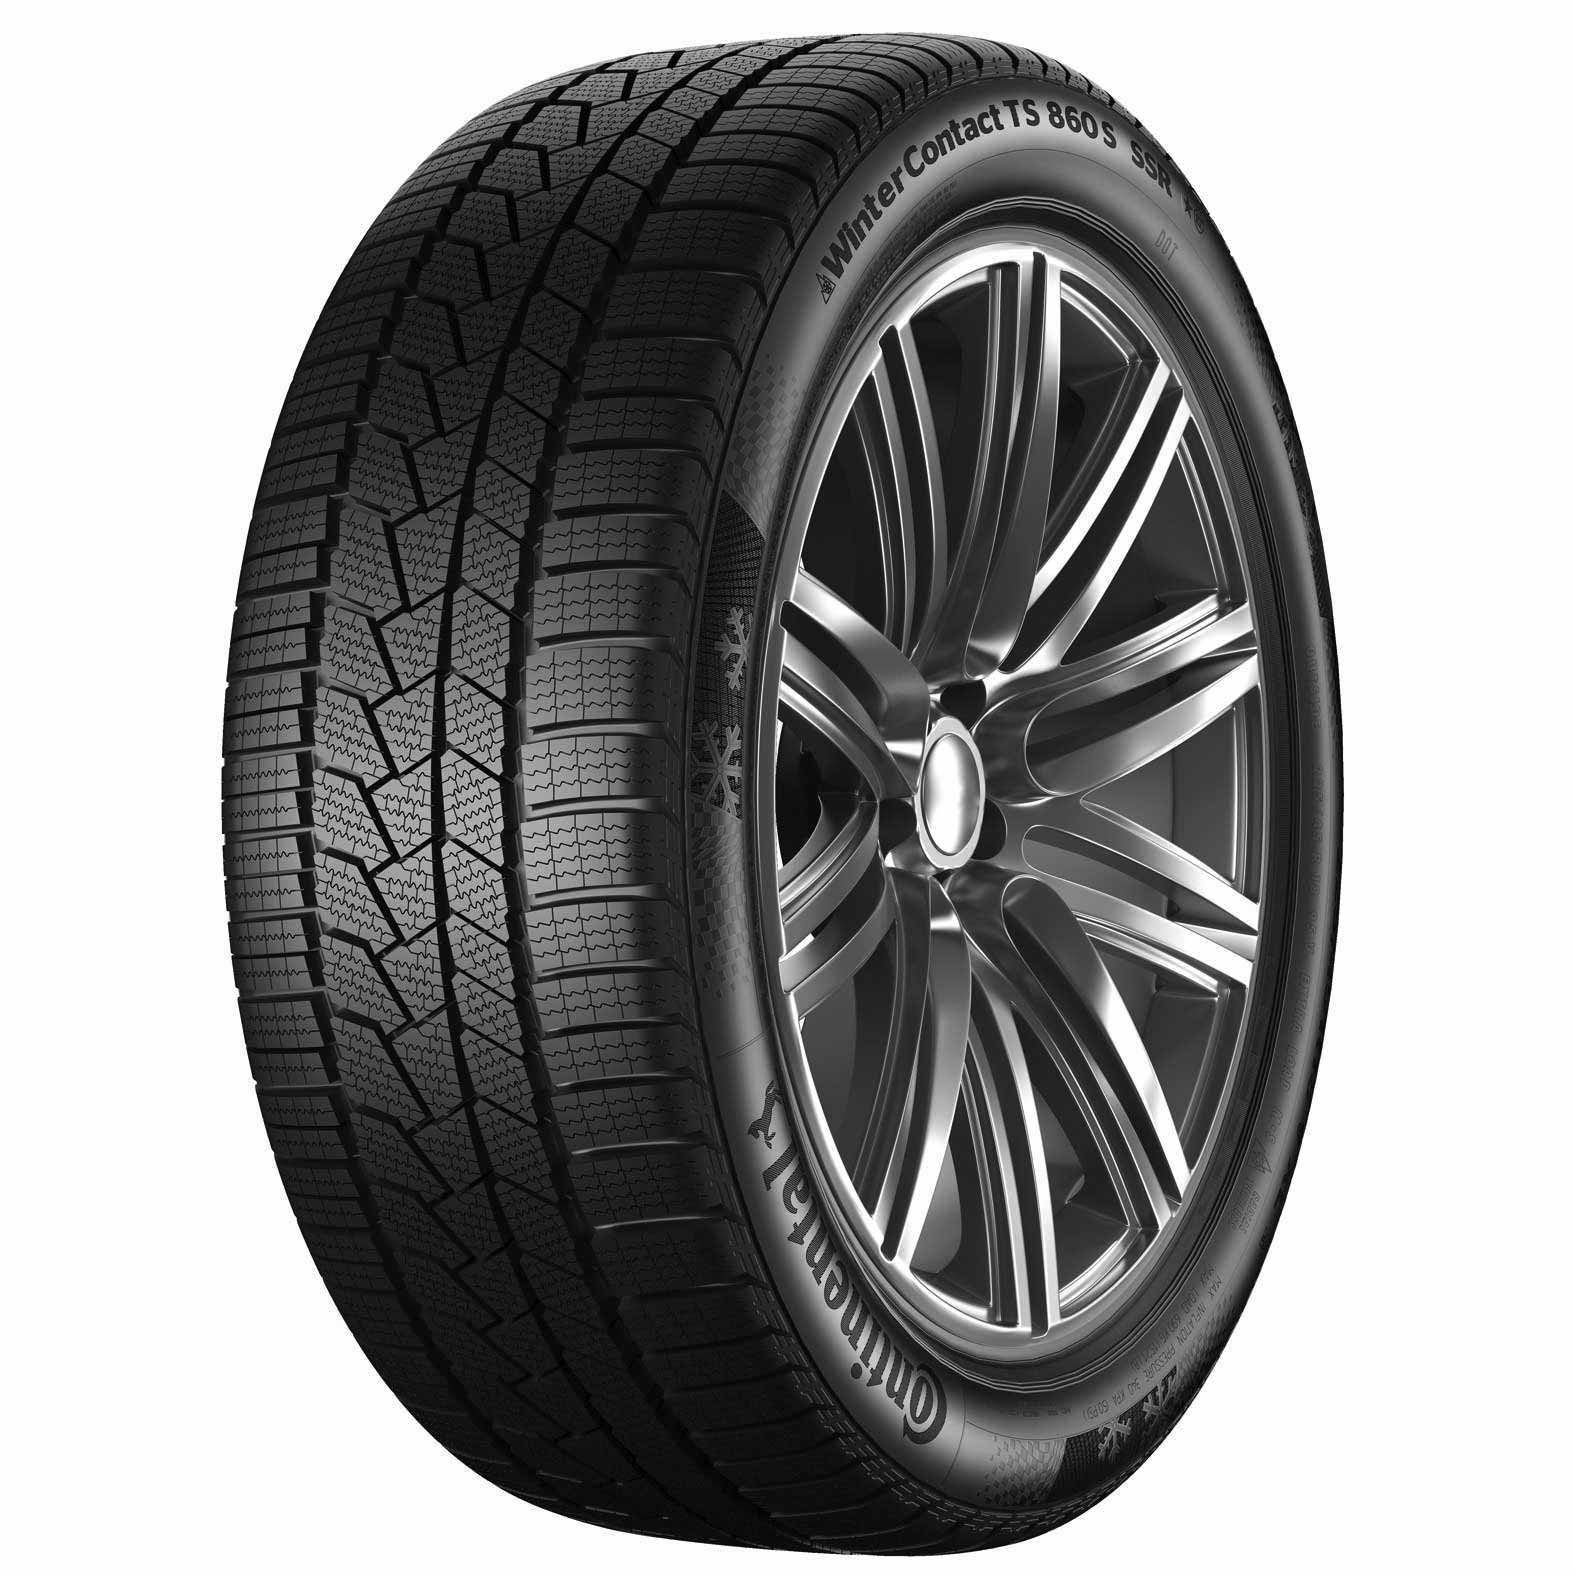 Continental WinterContact TS860 S Tires for Winter | Kal Tire